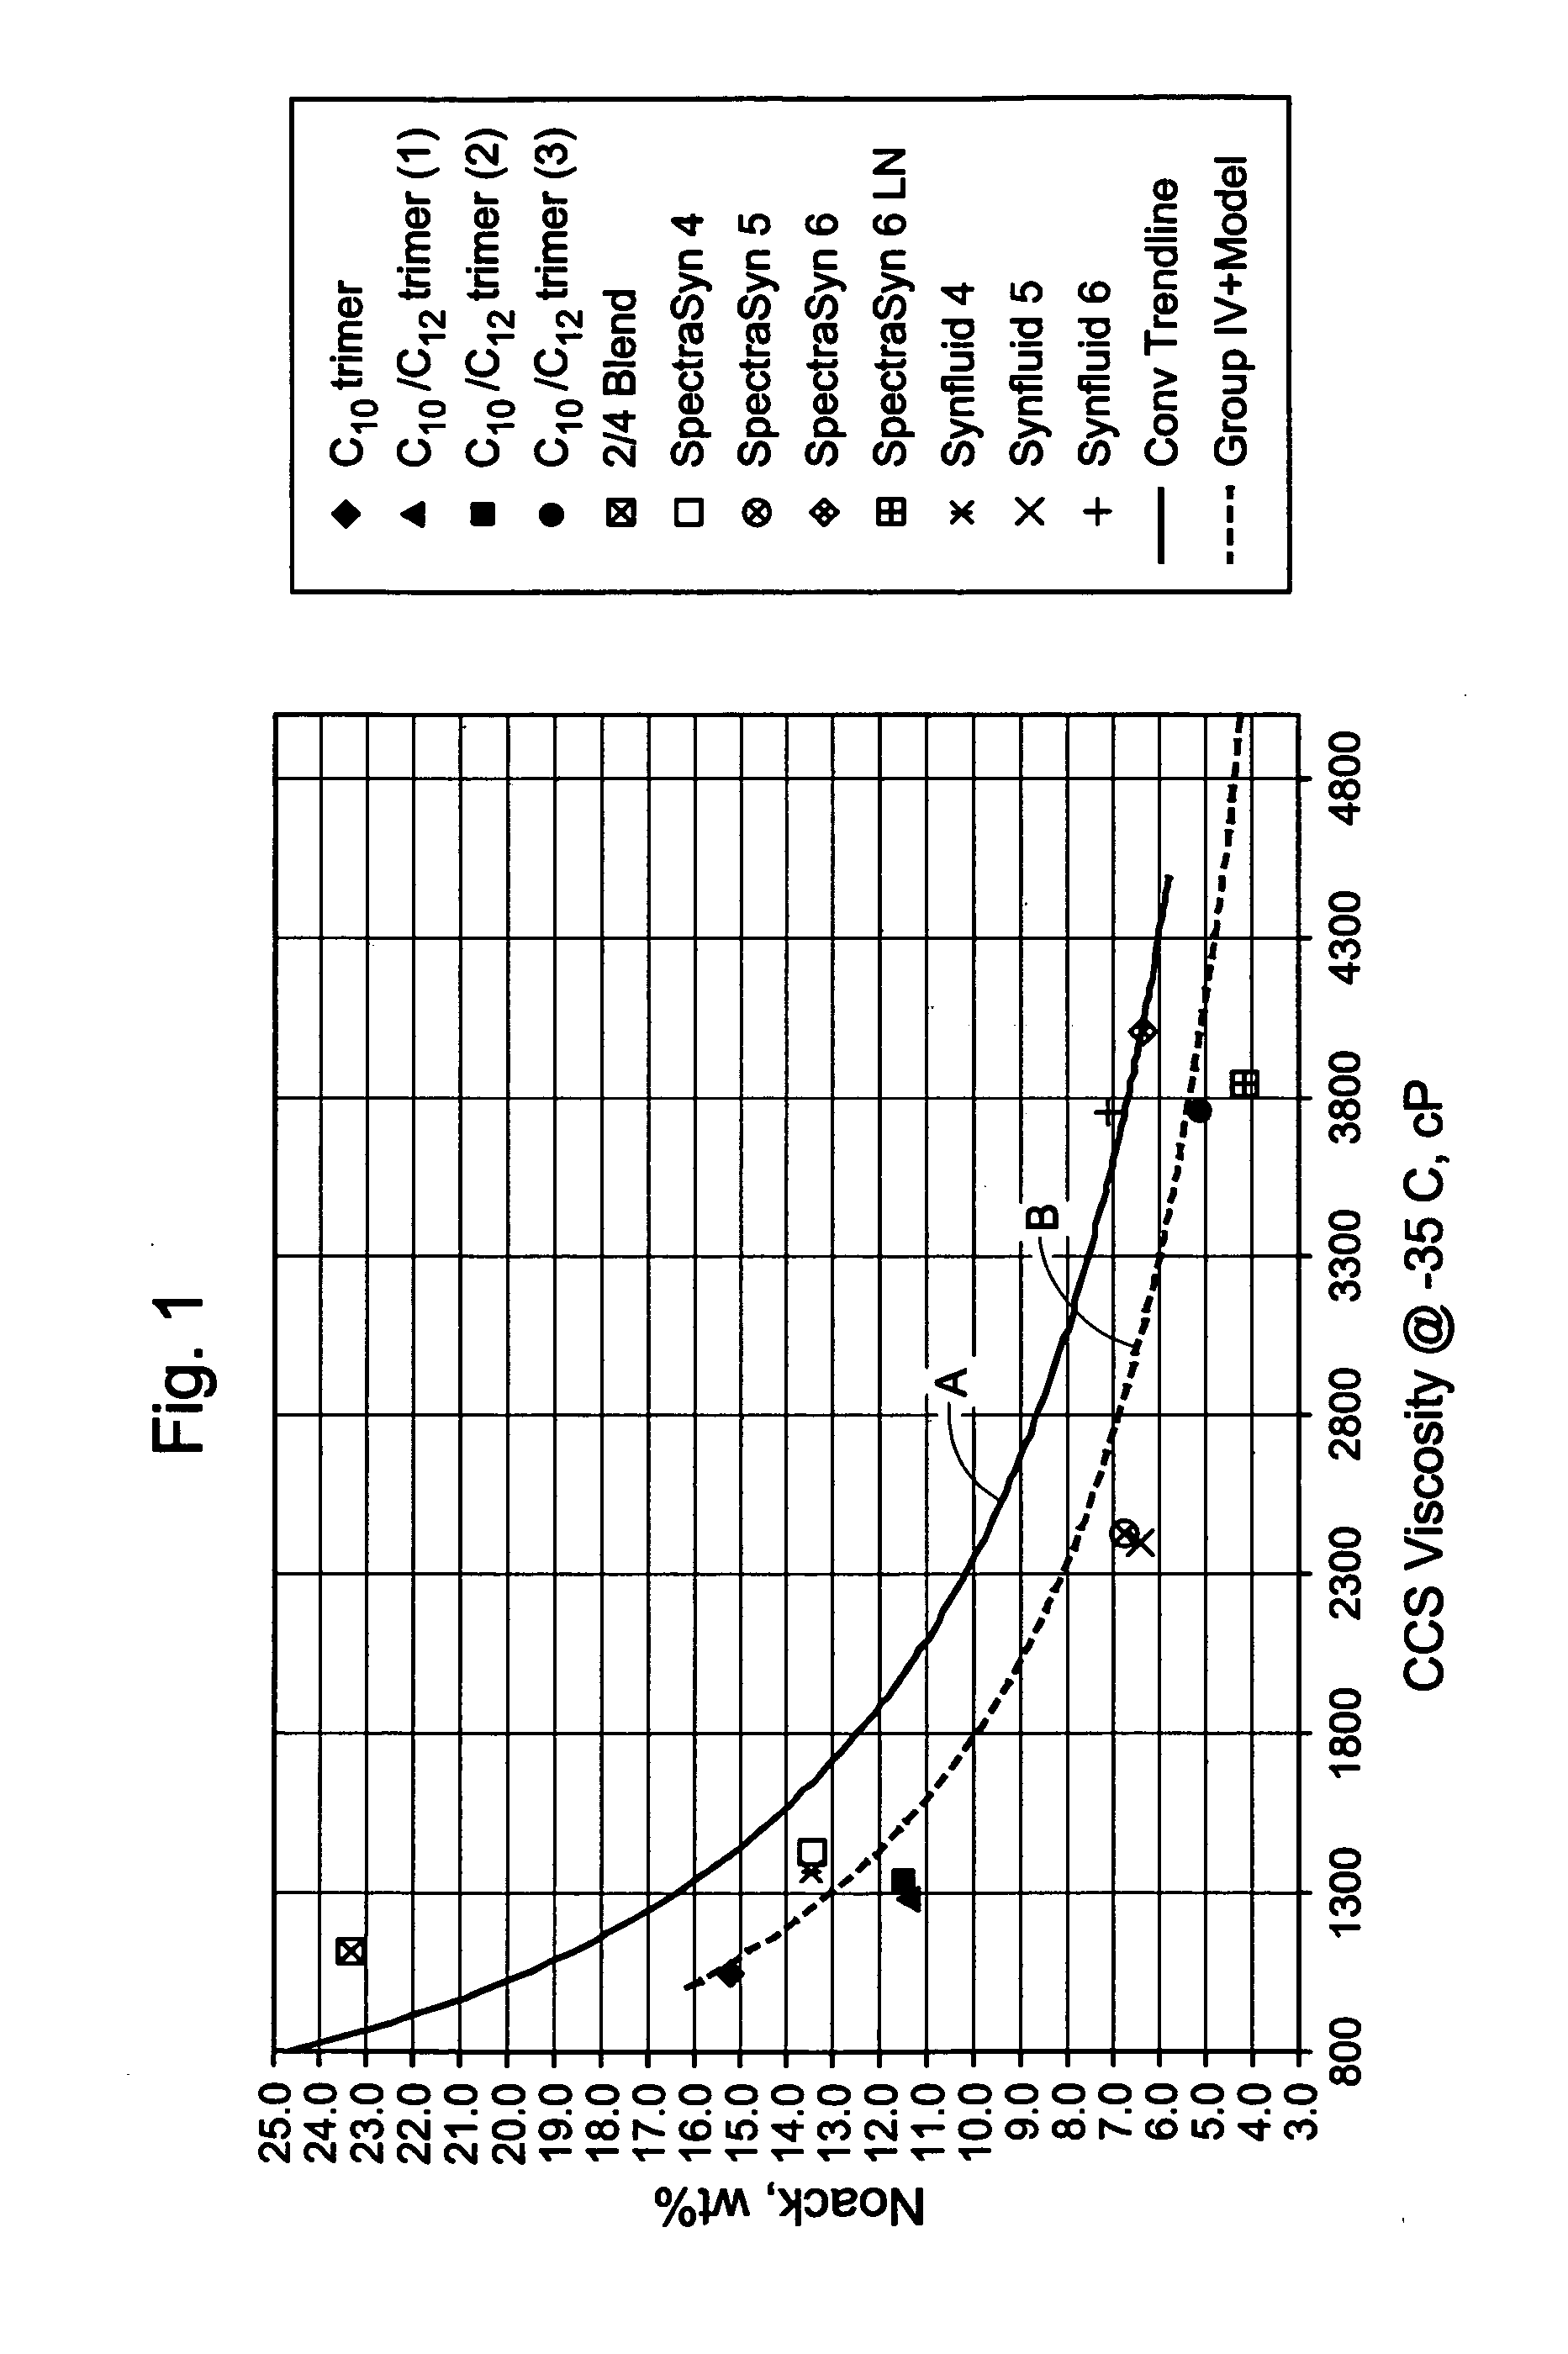 Blend comprising group II and group IV basestocks